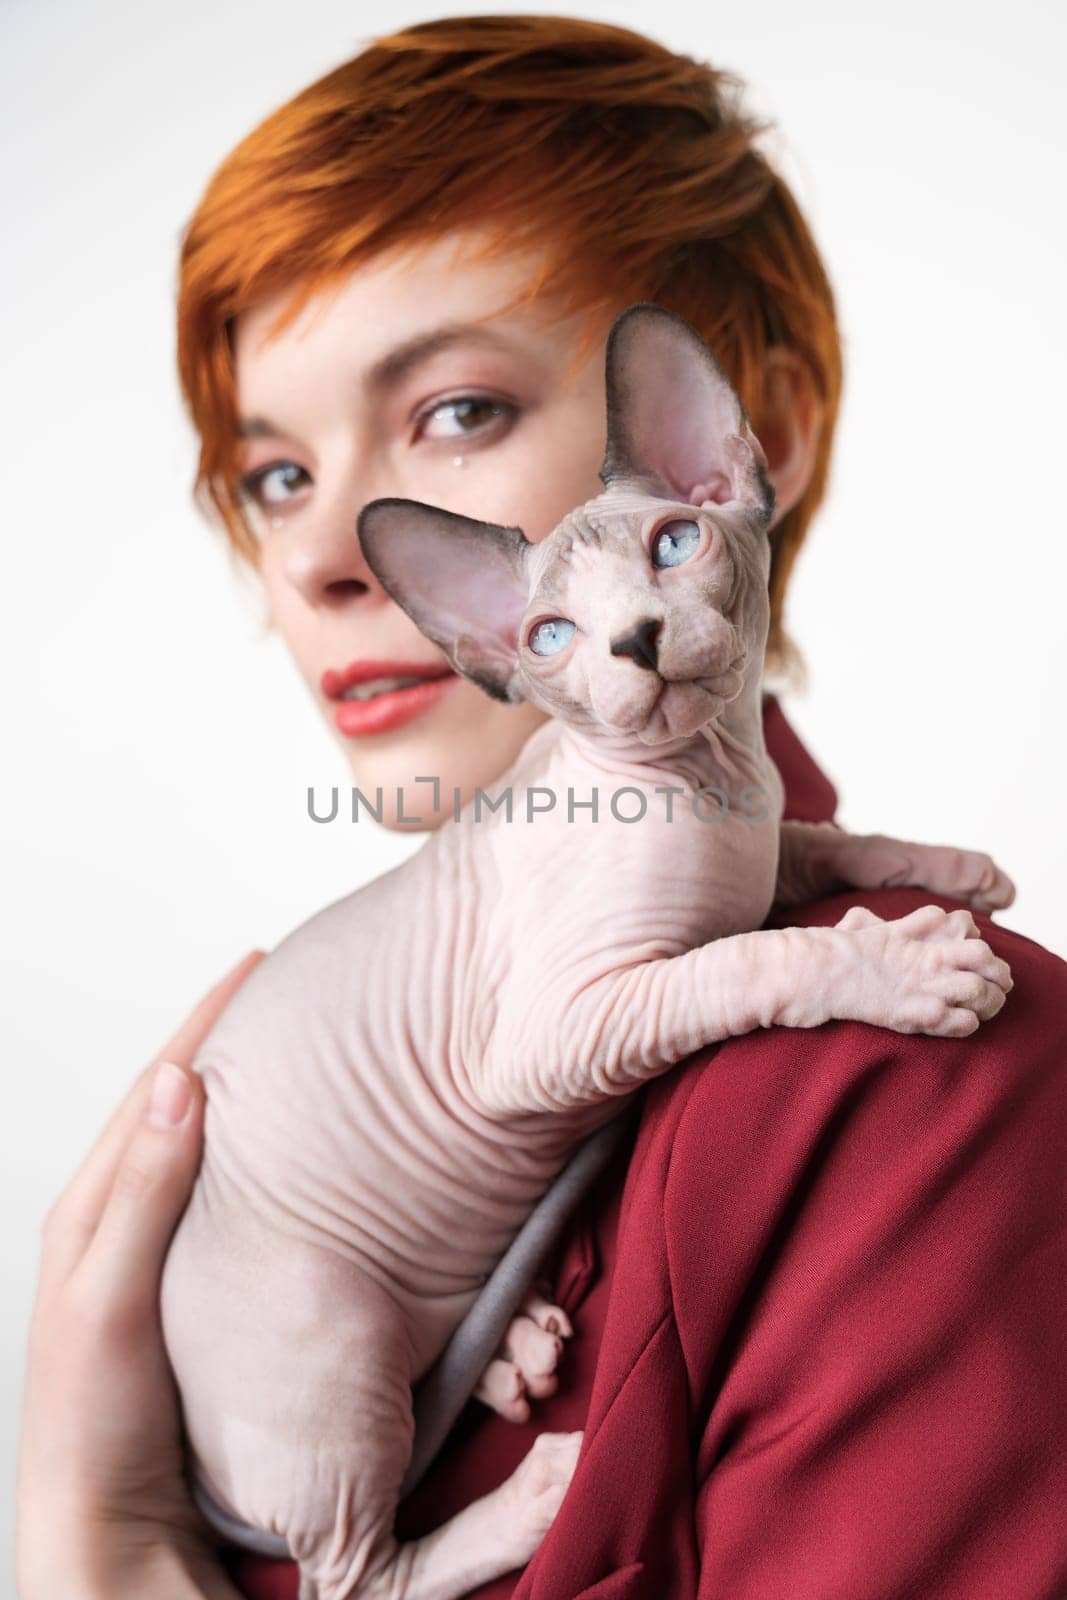 Playful Sphynx Hairless kitten looking up, sitting on shoulder redhead young woman with short hair. Selective focus on domestic cat, shallow depth of field. Studio shot, white background. Part series